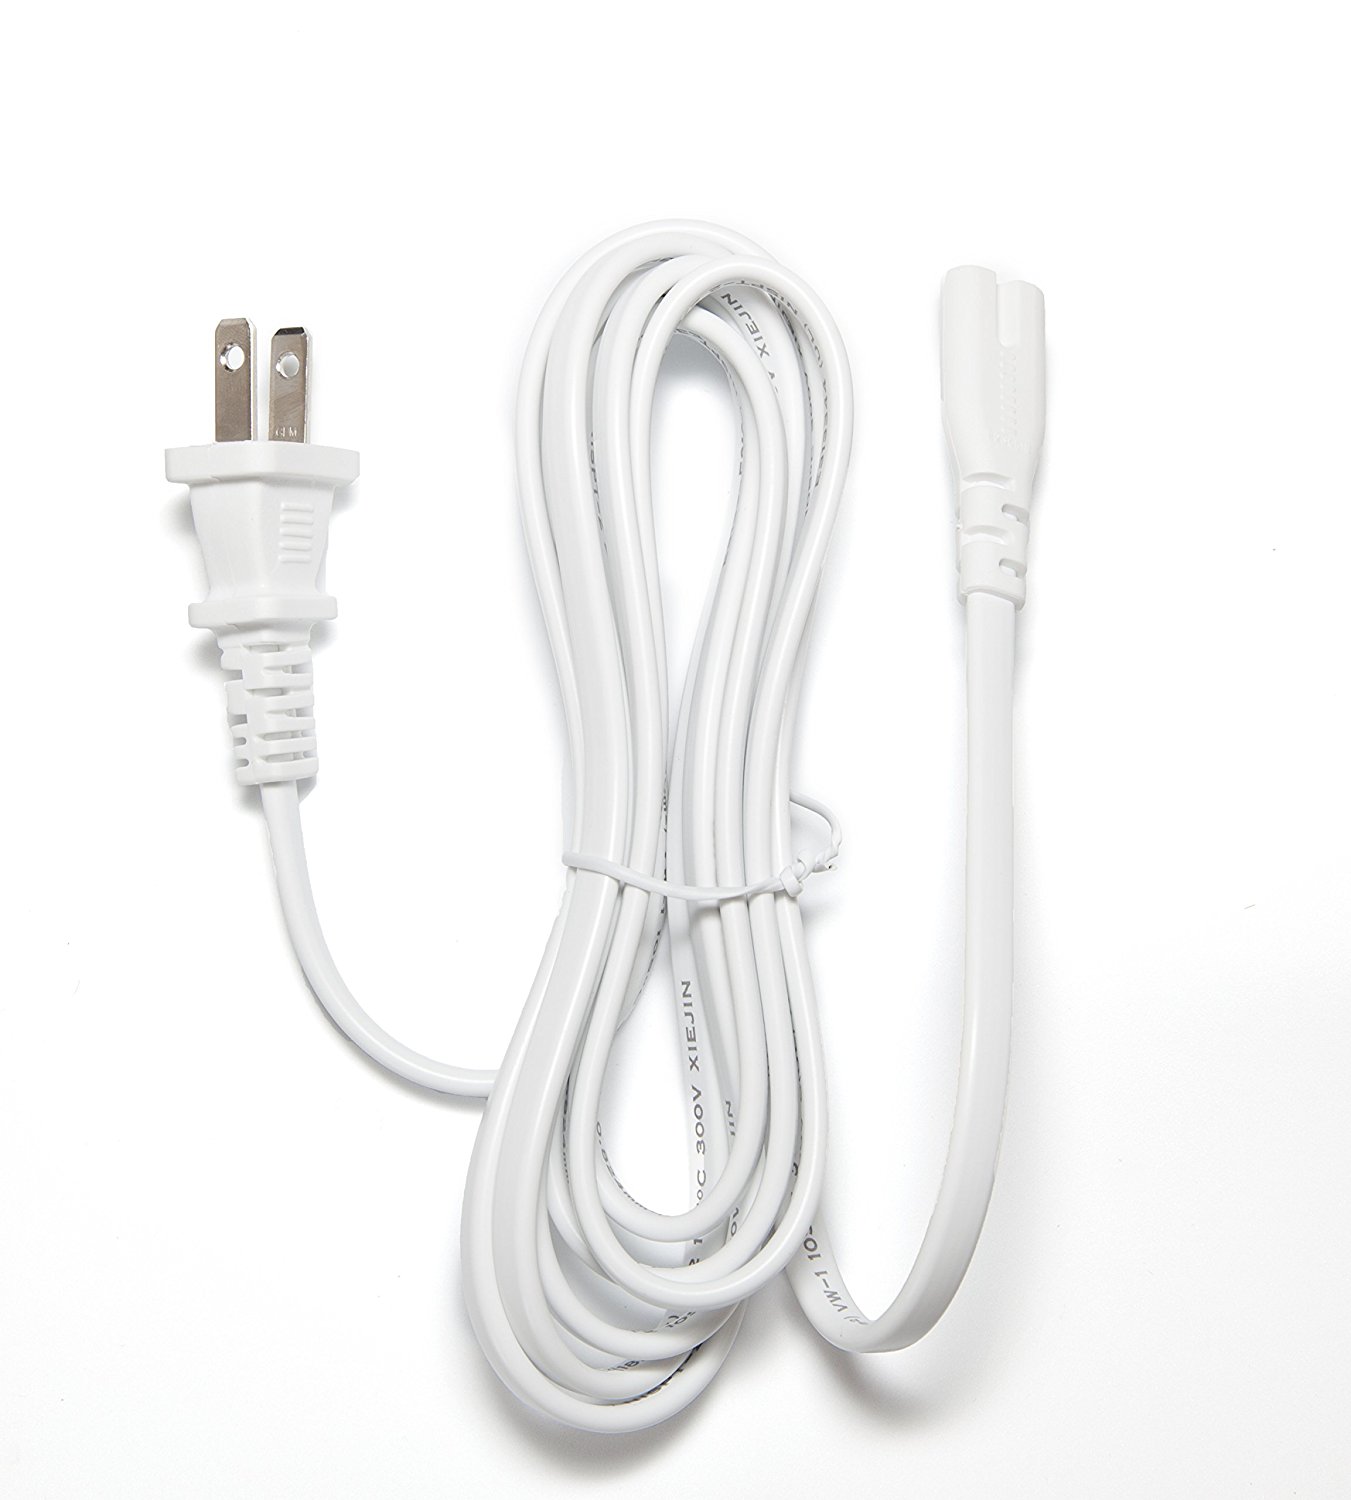 [UL Listed] OMNIHIL White 10 Feet Long AC Power Cord Compatible with RIVA FESTIVAL Smart Speaker-(RWF01) - image 1 of 1